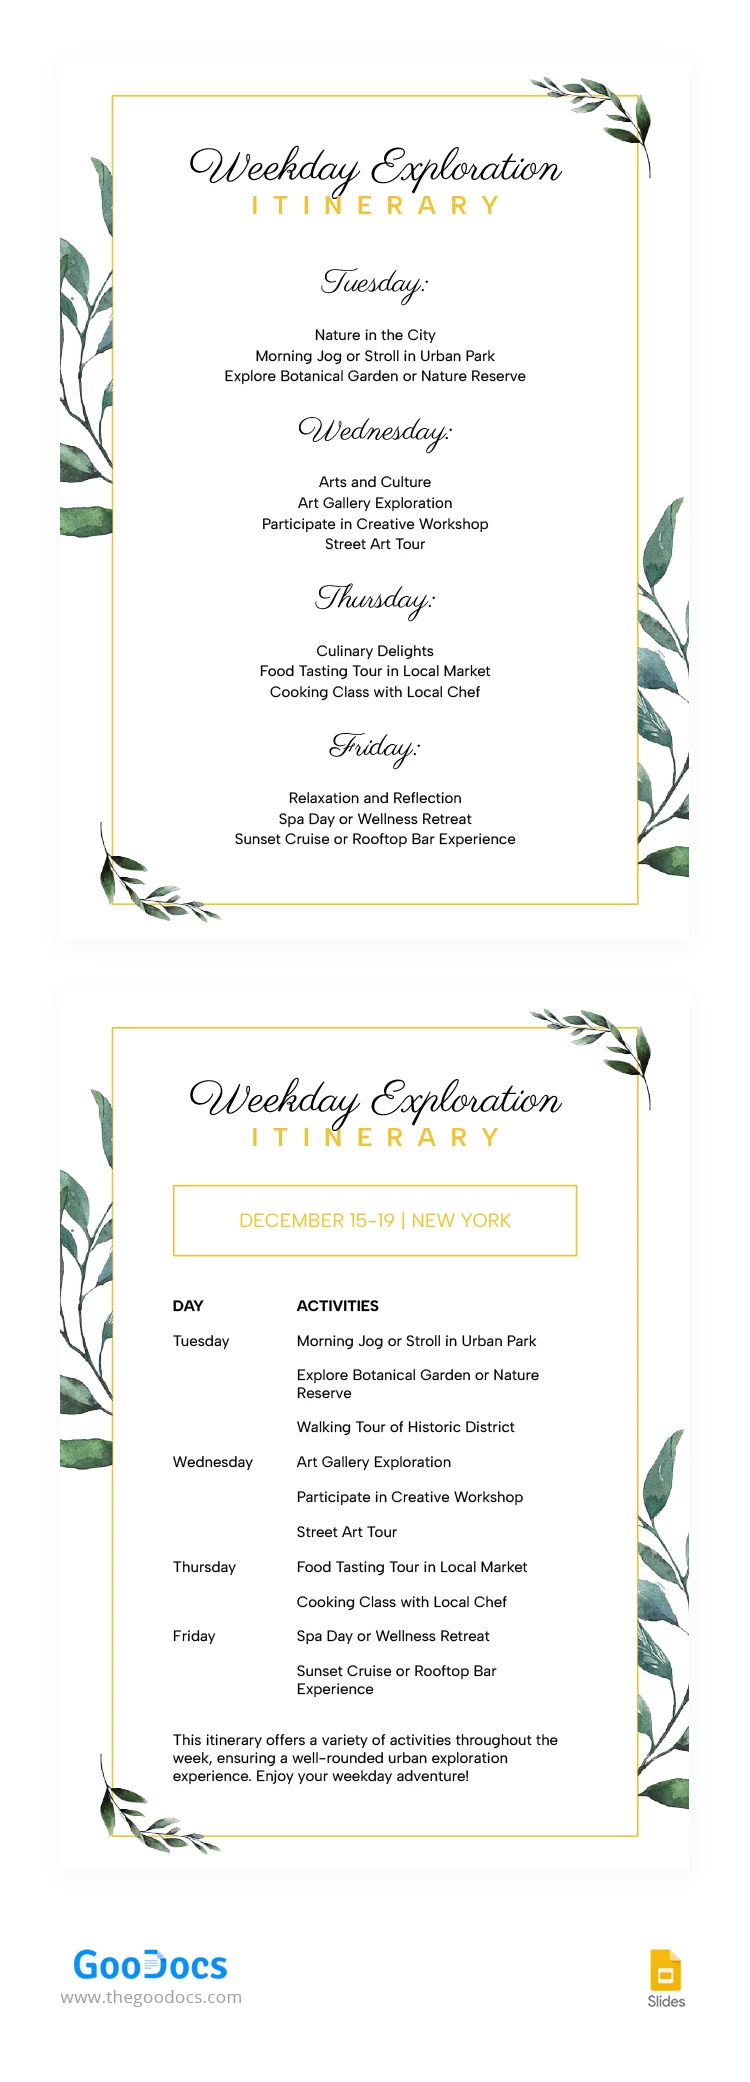 Floral Weekend Itinerary - free Google Docs Template - 10068562